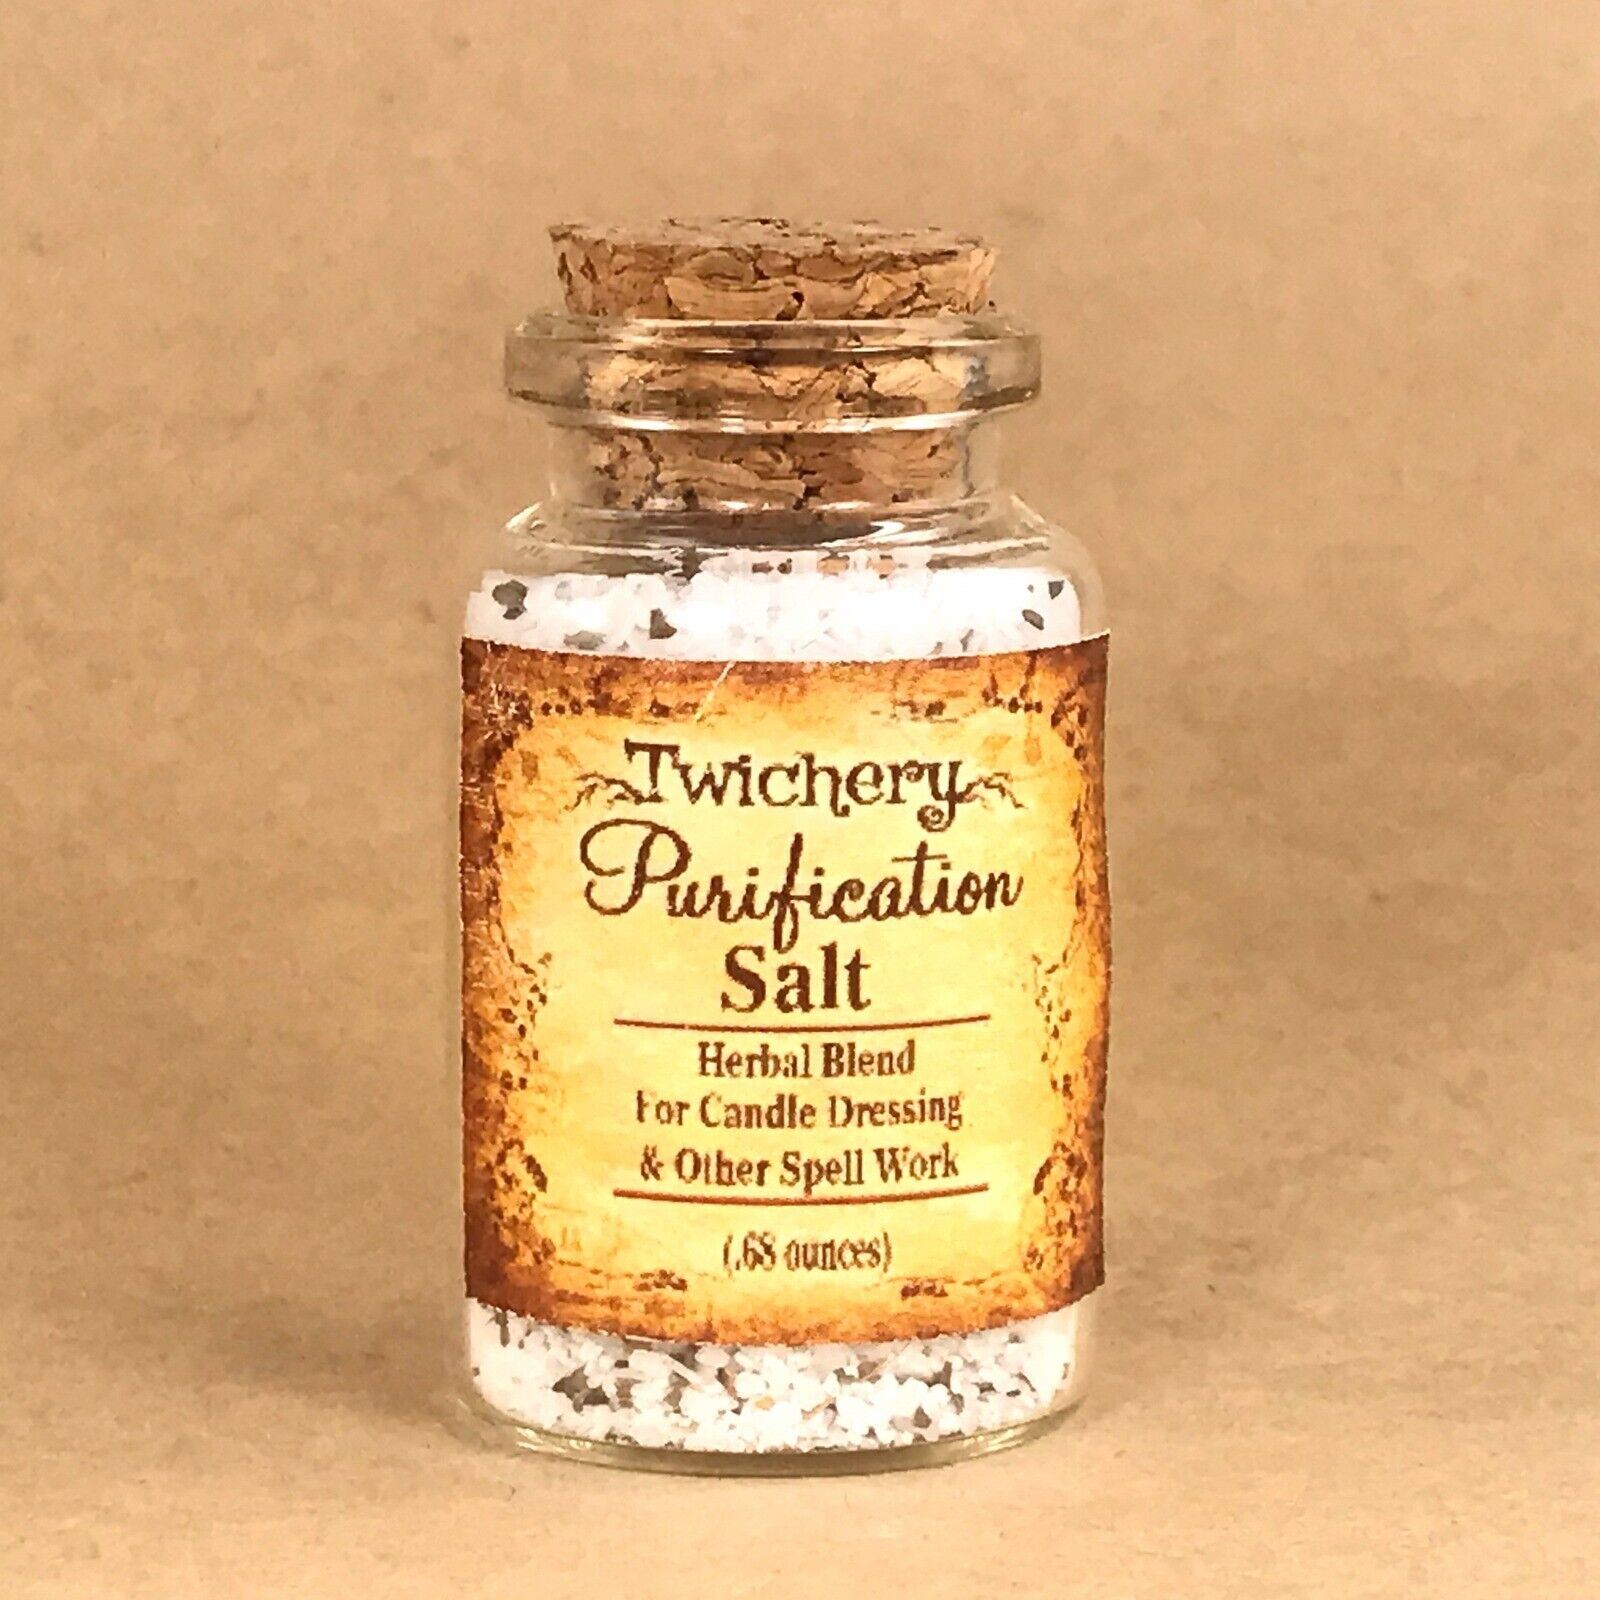 PURIFICATION RITUAL SALT, Candle Dressing, Spell Casting Hoodoo FROM TWICHERY